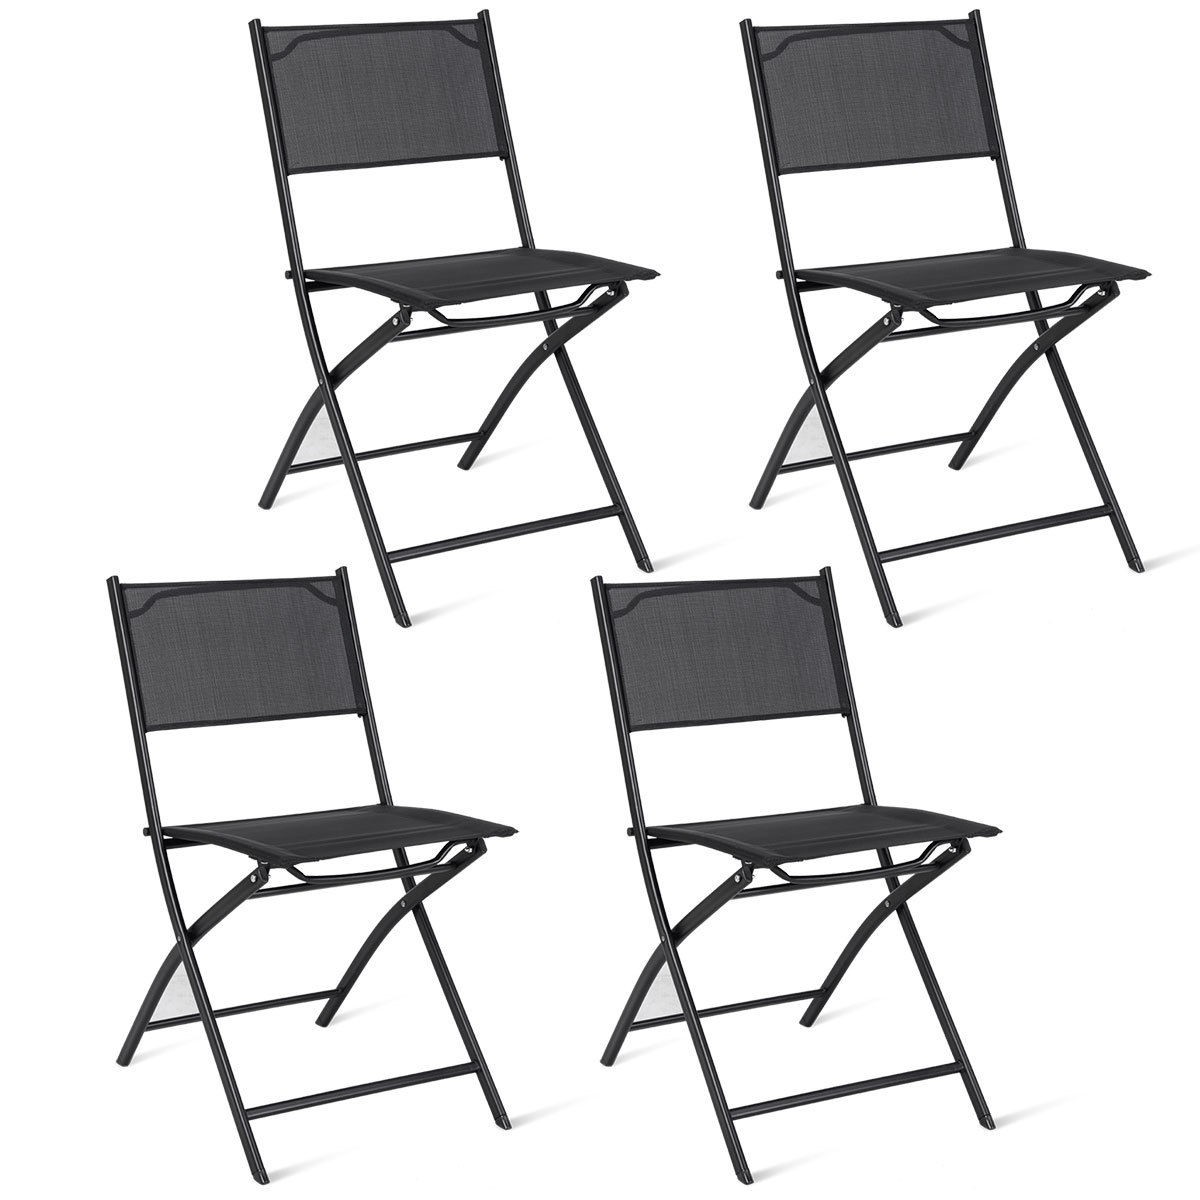 Set Of 4 Outdoor Camping Deck Garden Folding Chairs